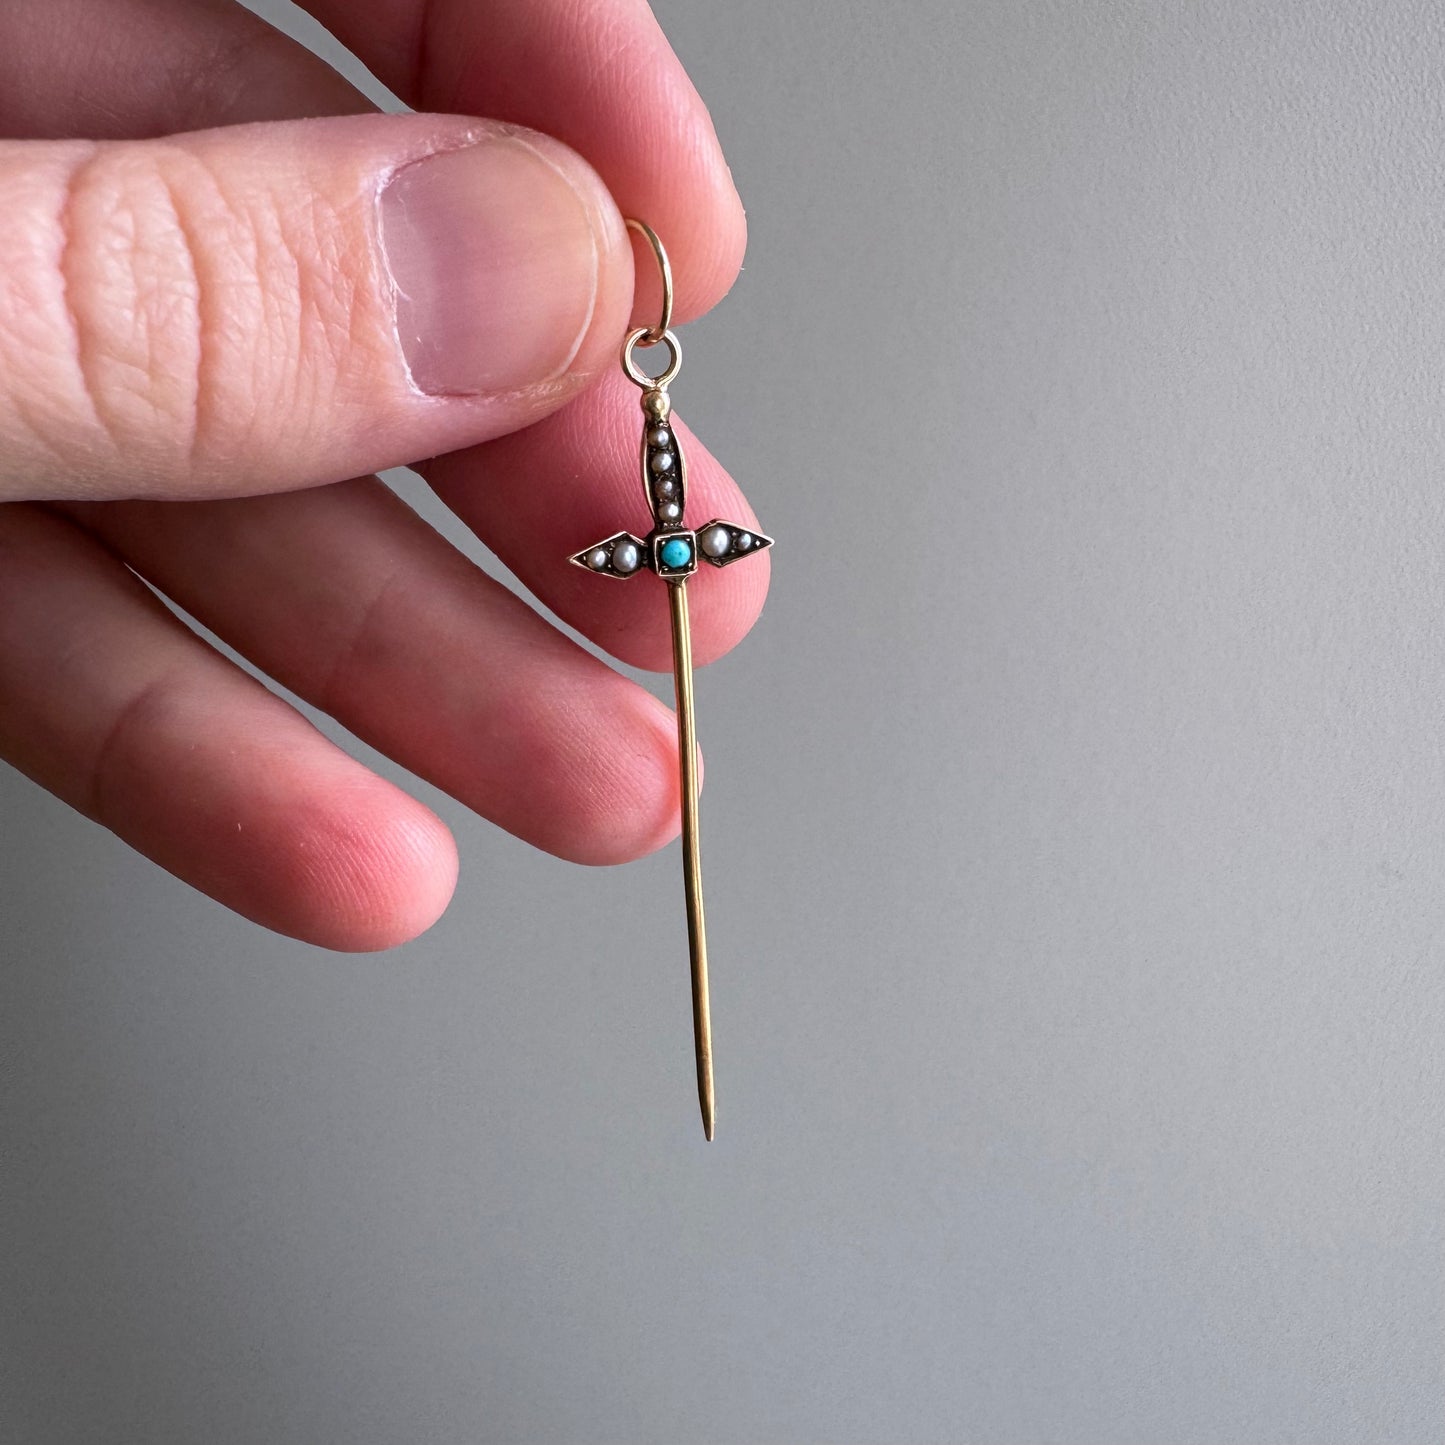 reimagined A N T I Q U E // helpful sword / 14k yellow gold turquoise and seed pearl sword toothpick pendant / a hat pin conversion pendant